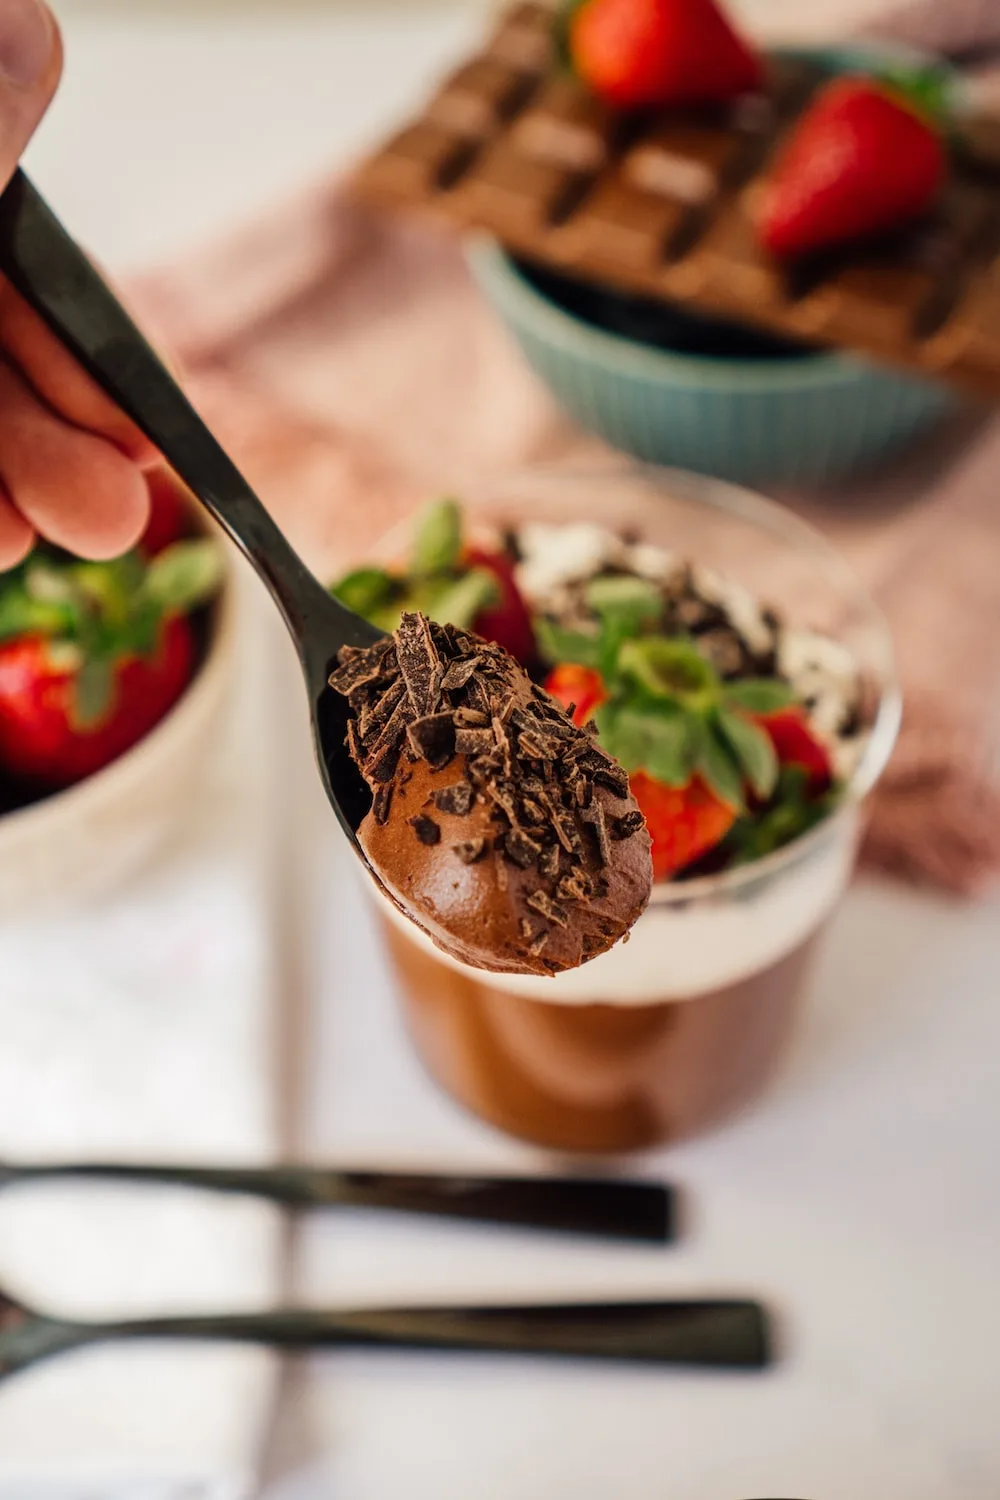 Satisfy Your Sweet Tooth with Avocado Chocolate Pudding: A Guilt-Free Dessert Option